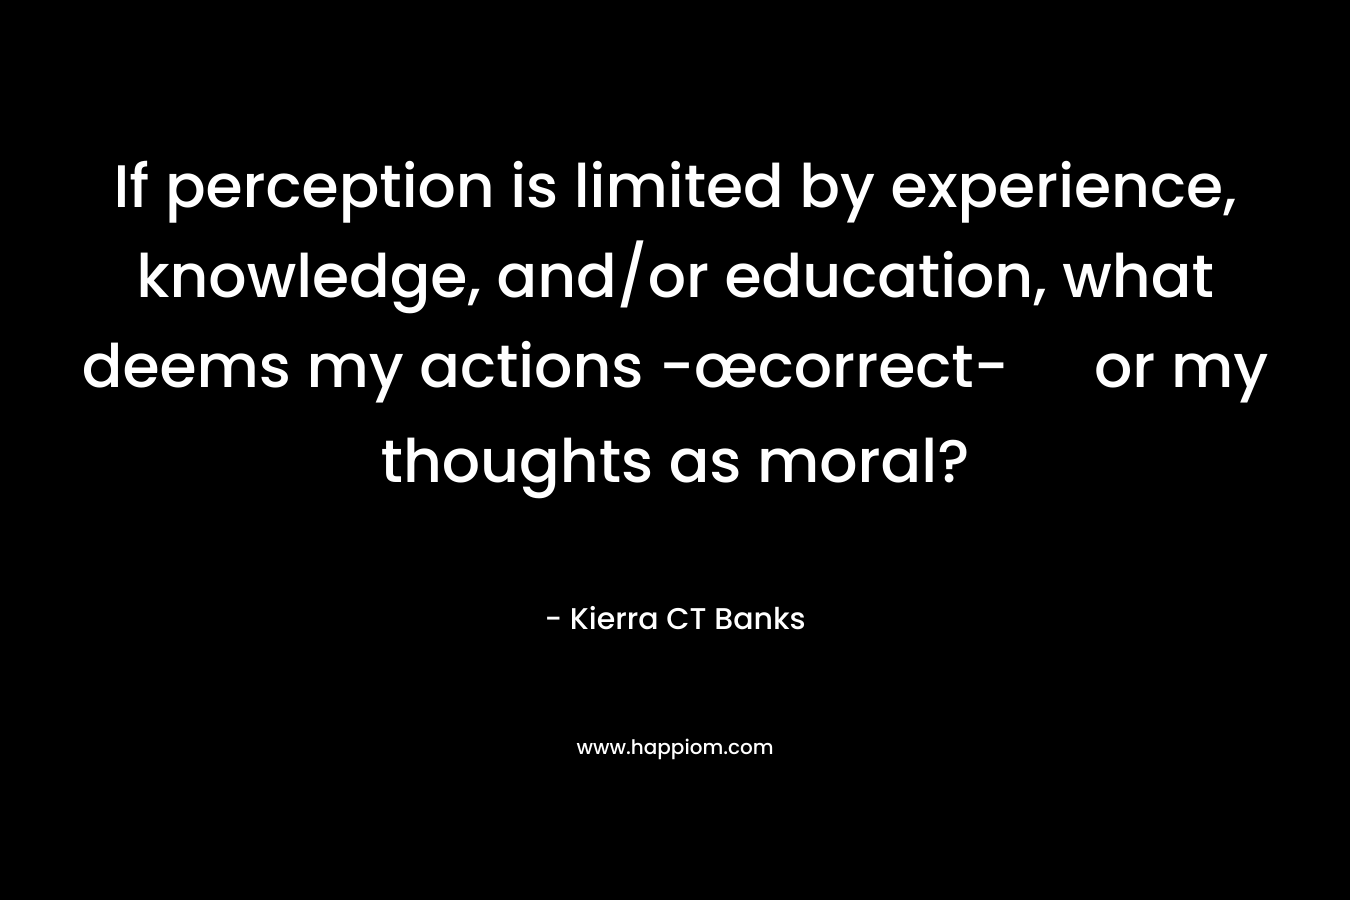 If perception is limited by experience, knowledge, and/or education, what deems my actions -œcorrect- or my thoughts as moral? – Kierra CT Banks